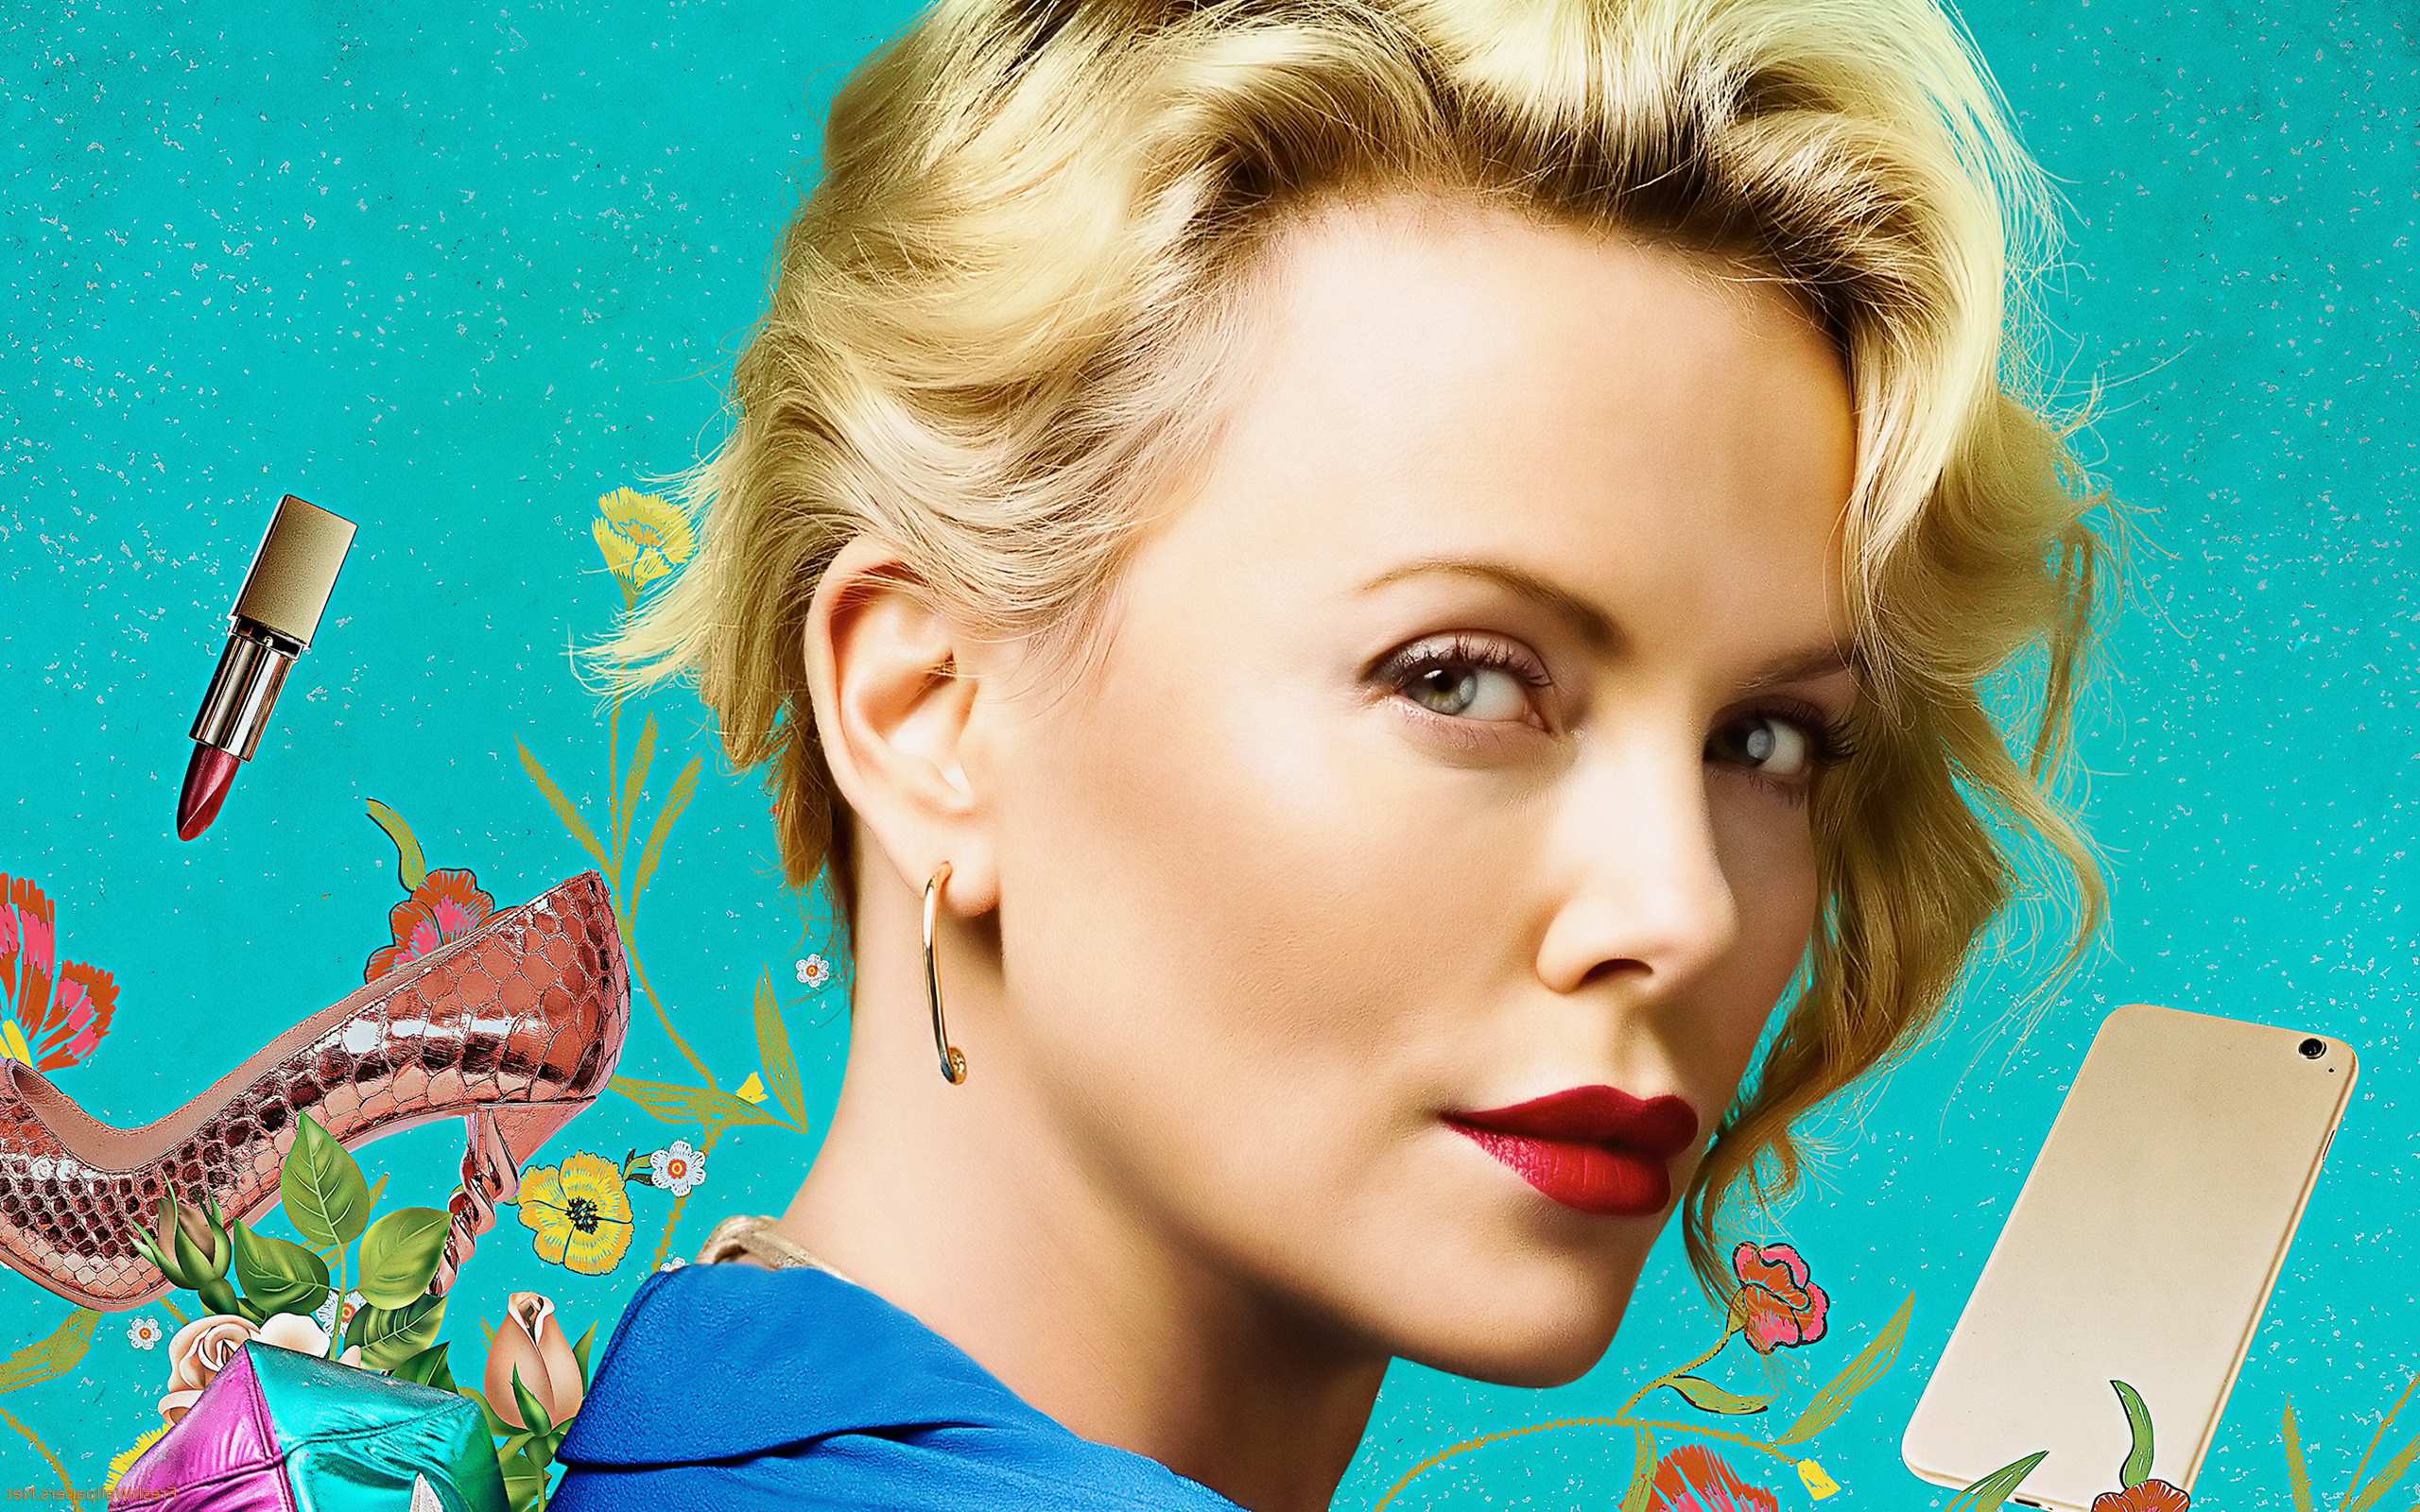 Hd Resolution - Charlize Theron In Gringo , HD Wallpaper & Backgrounds